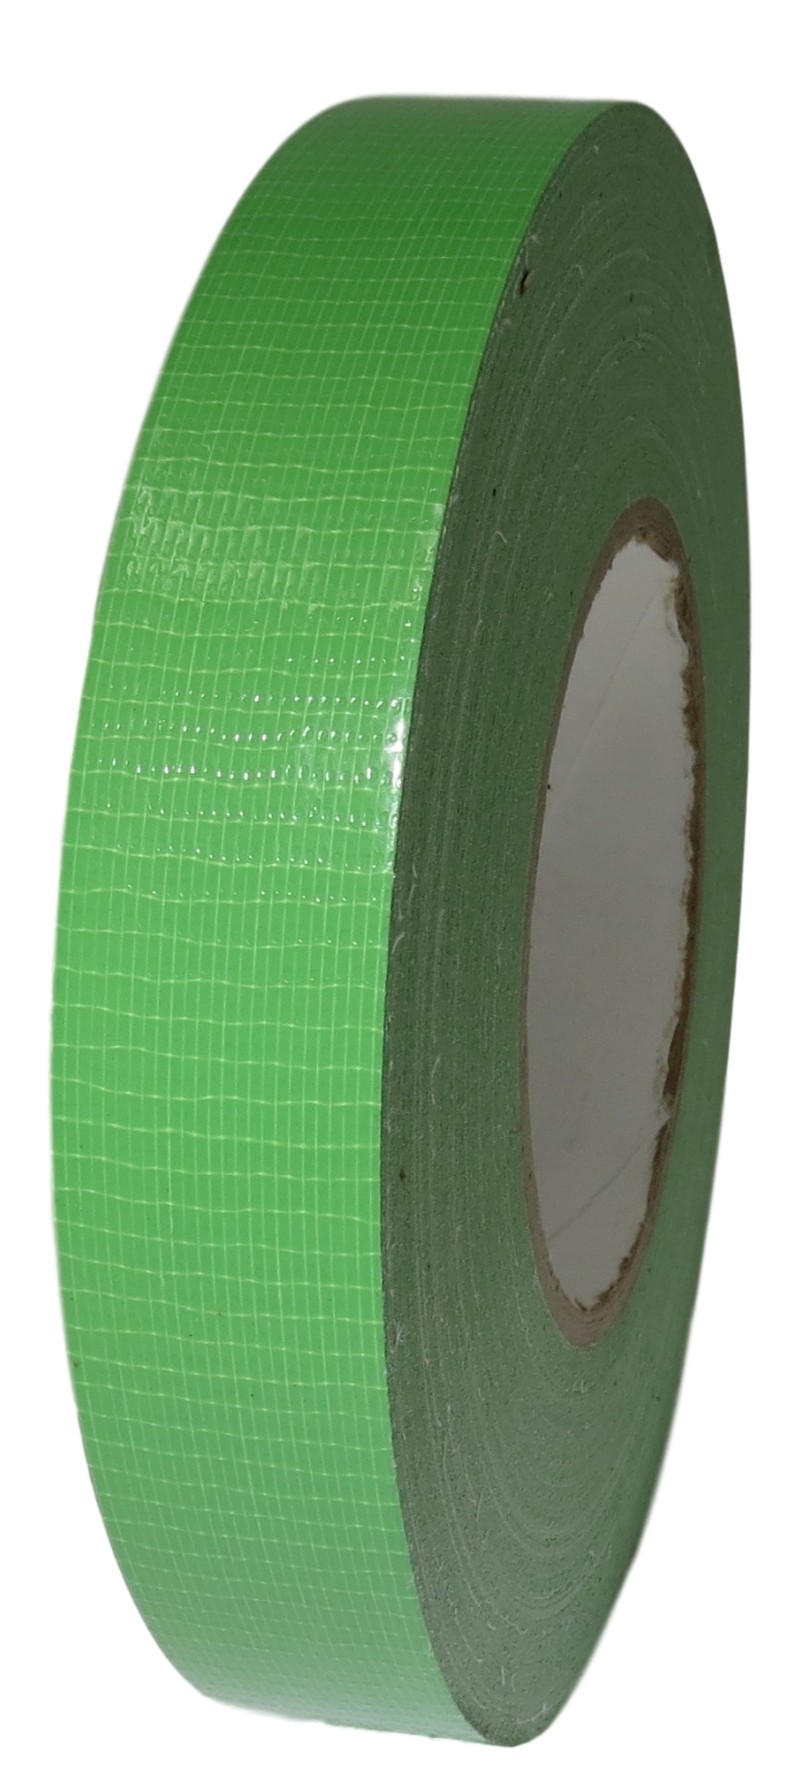  WOD DTC12 Contractor Grade Fluorescent Green Duct Tape 12 Mil,  3/4 inch x 60 yds. Waterproof, UV Resistant for Crafts & Home Improvement :  Industrial & Scientific